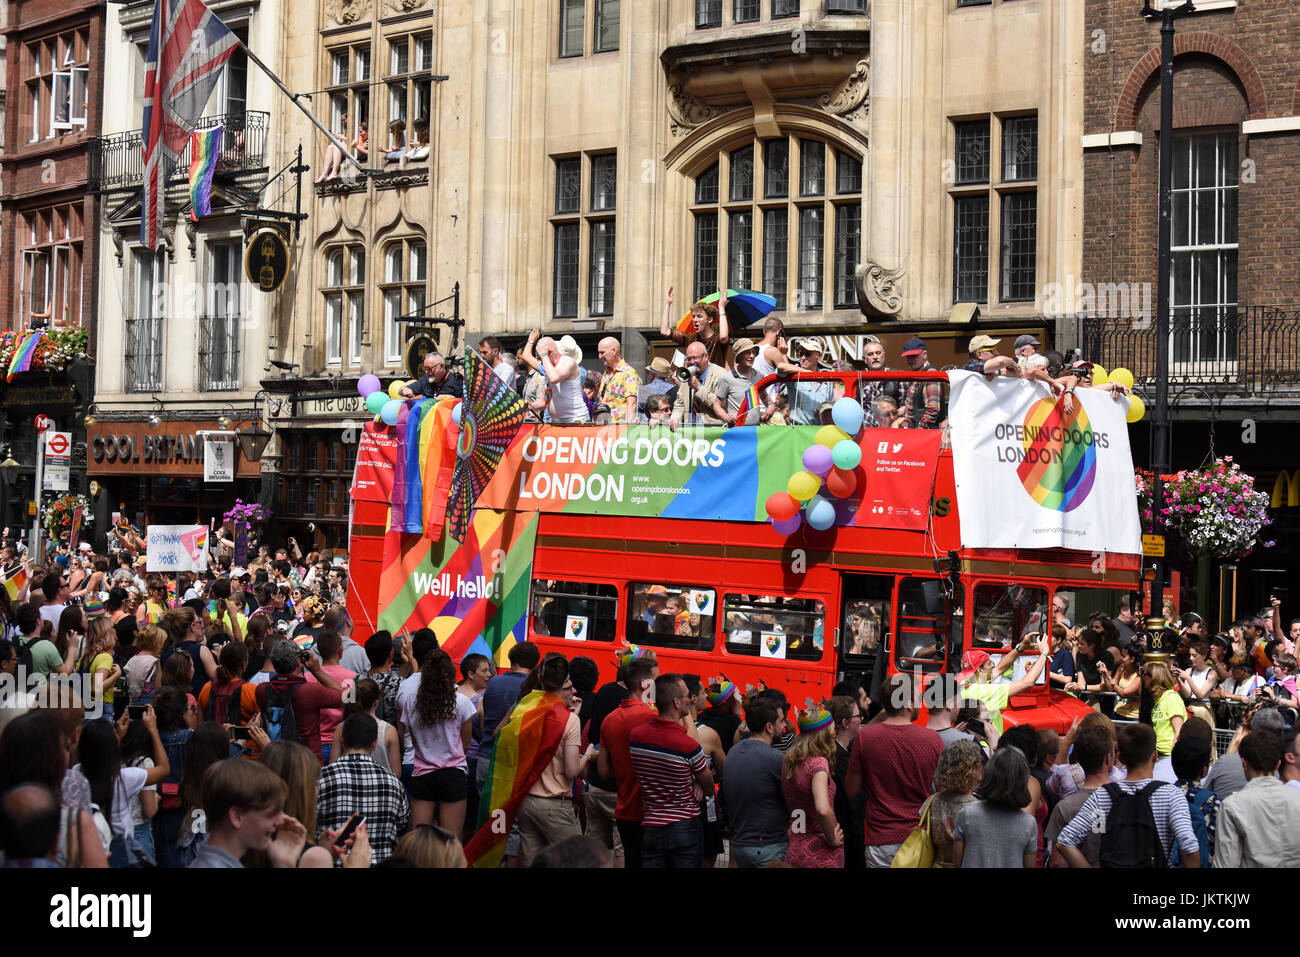 Supporters of the Opening Doors London charity drive on the double-decker red bus through central London at the Pride in London parade, 2017. Stock Photo